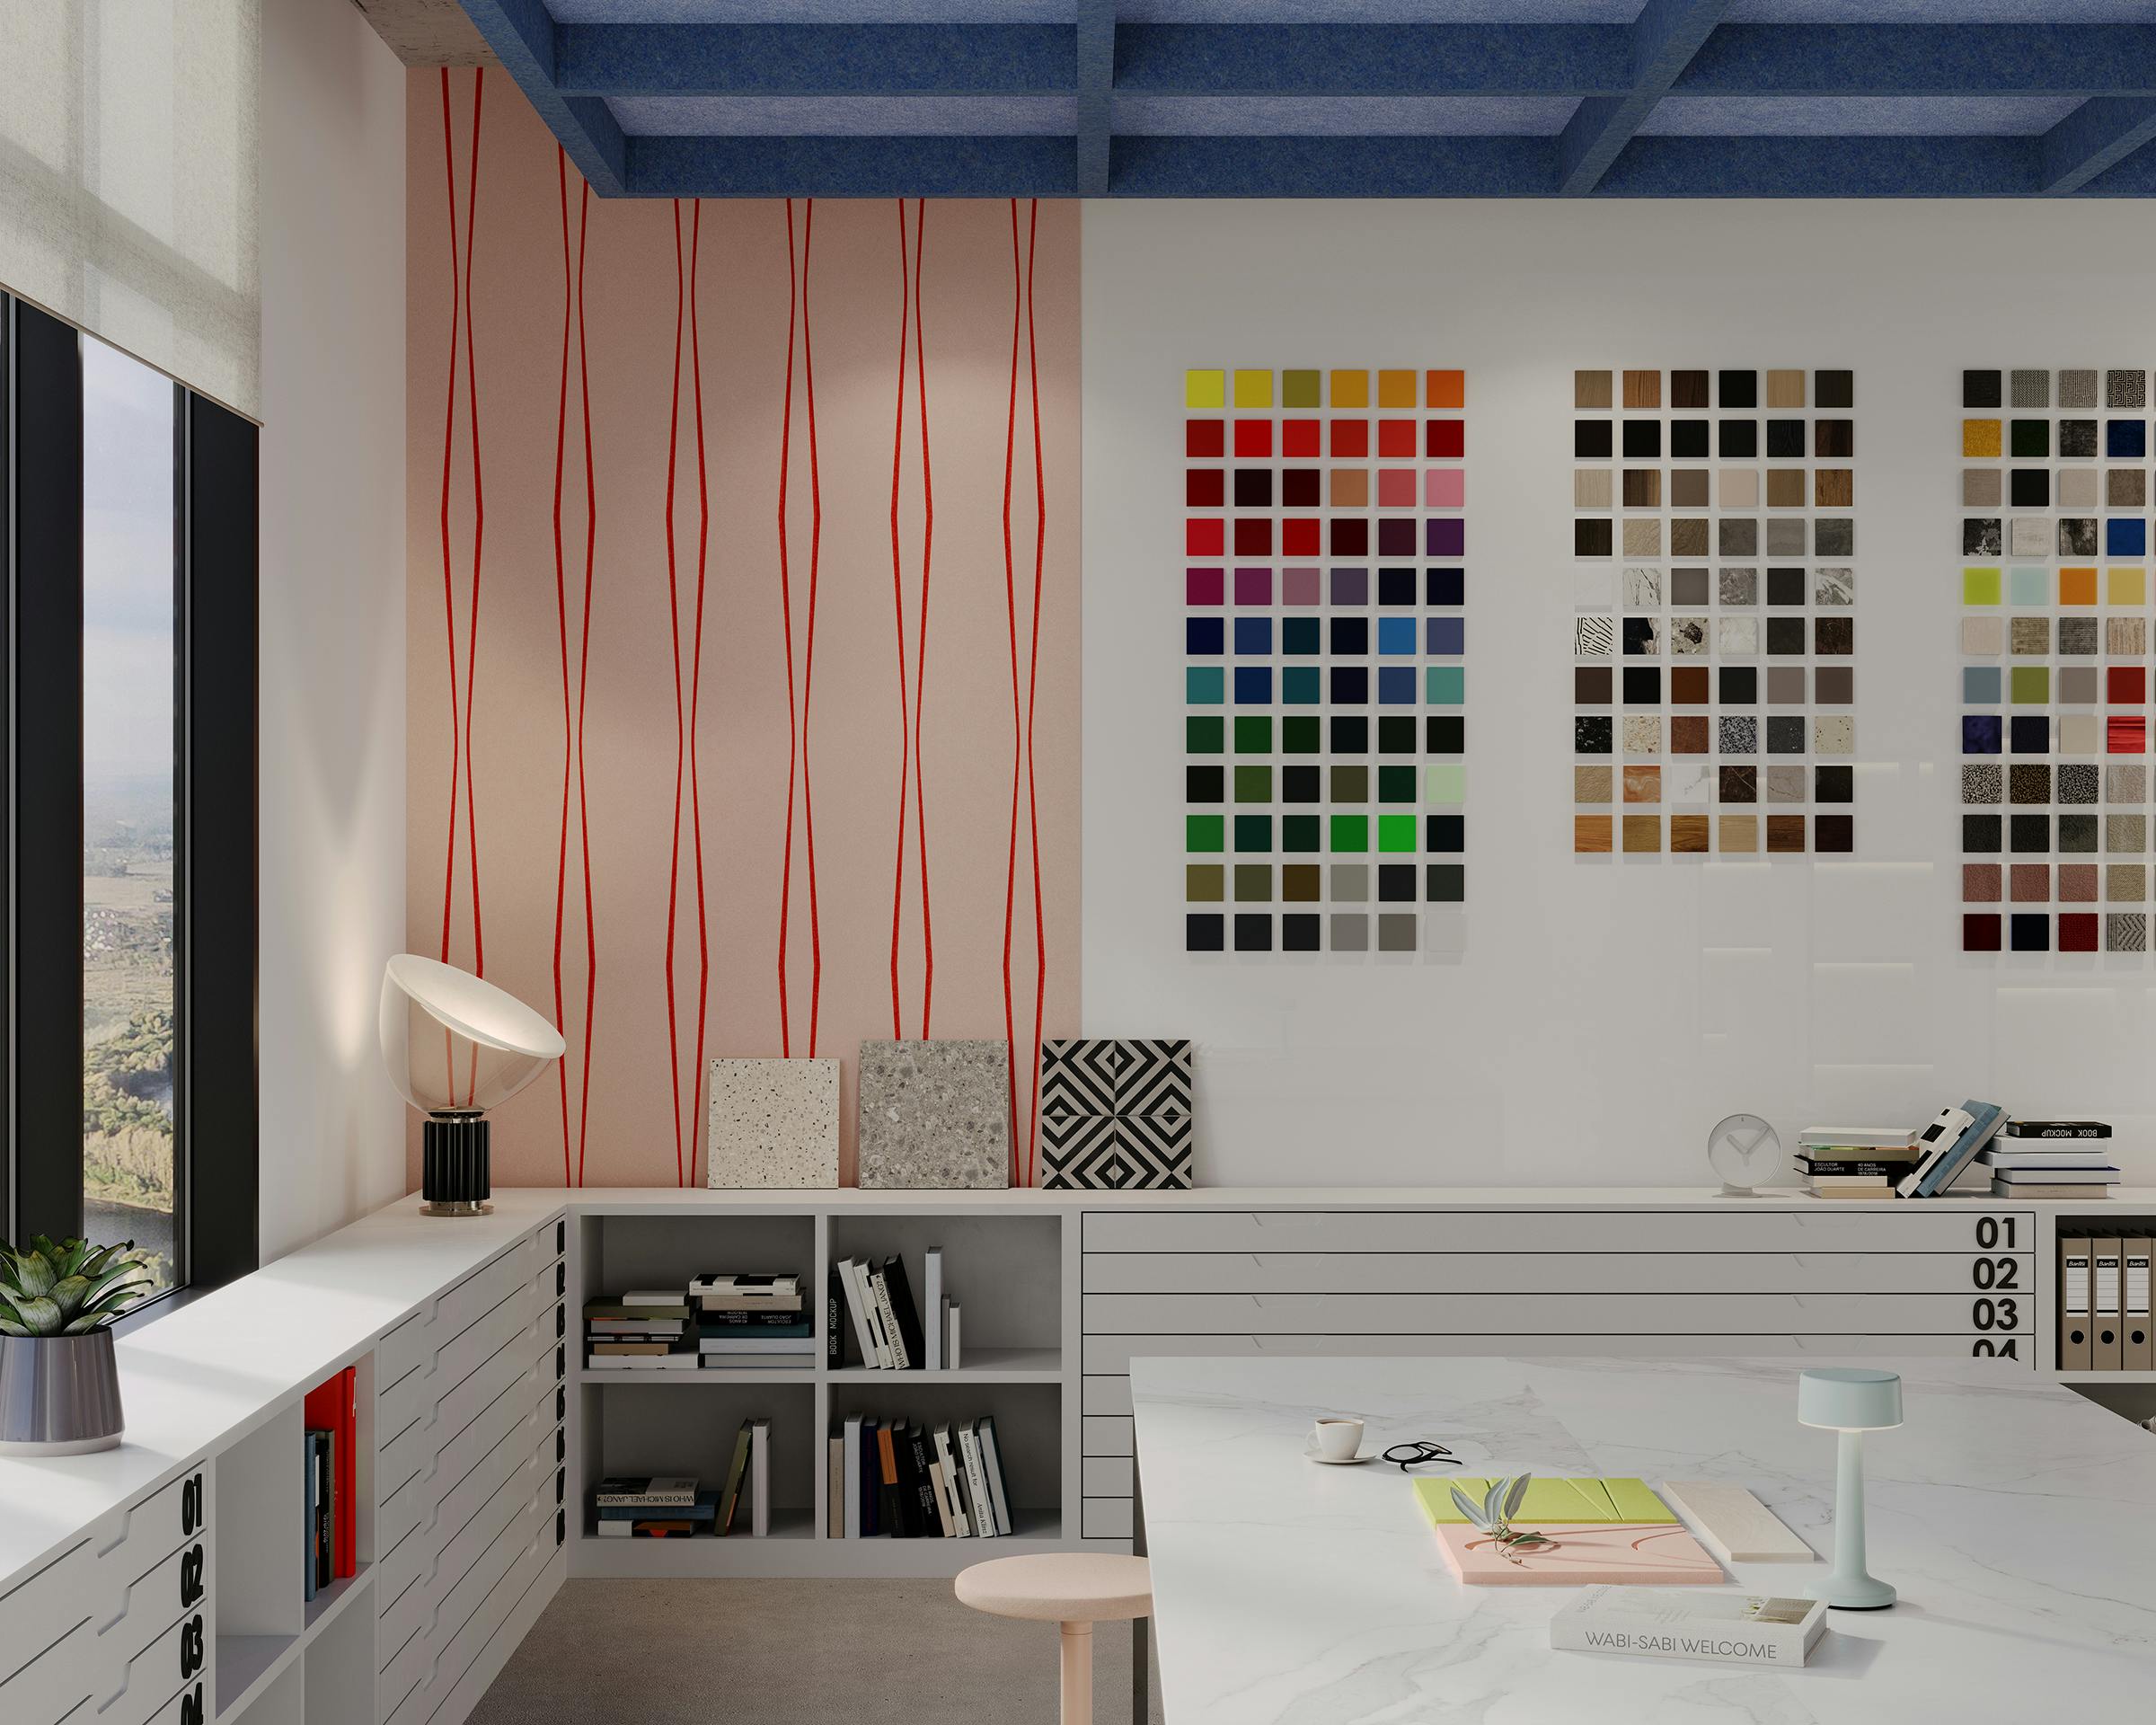 A modern design studio featuring a large table with various materials and a colorful pen holder. The background wall displays vibrant color swatches, and a side wall has abstract wave patterns. A window lets in natural light, illuminating the capped framework ceiling and meticulously arranged decor.